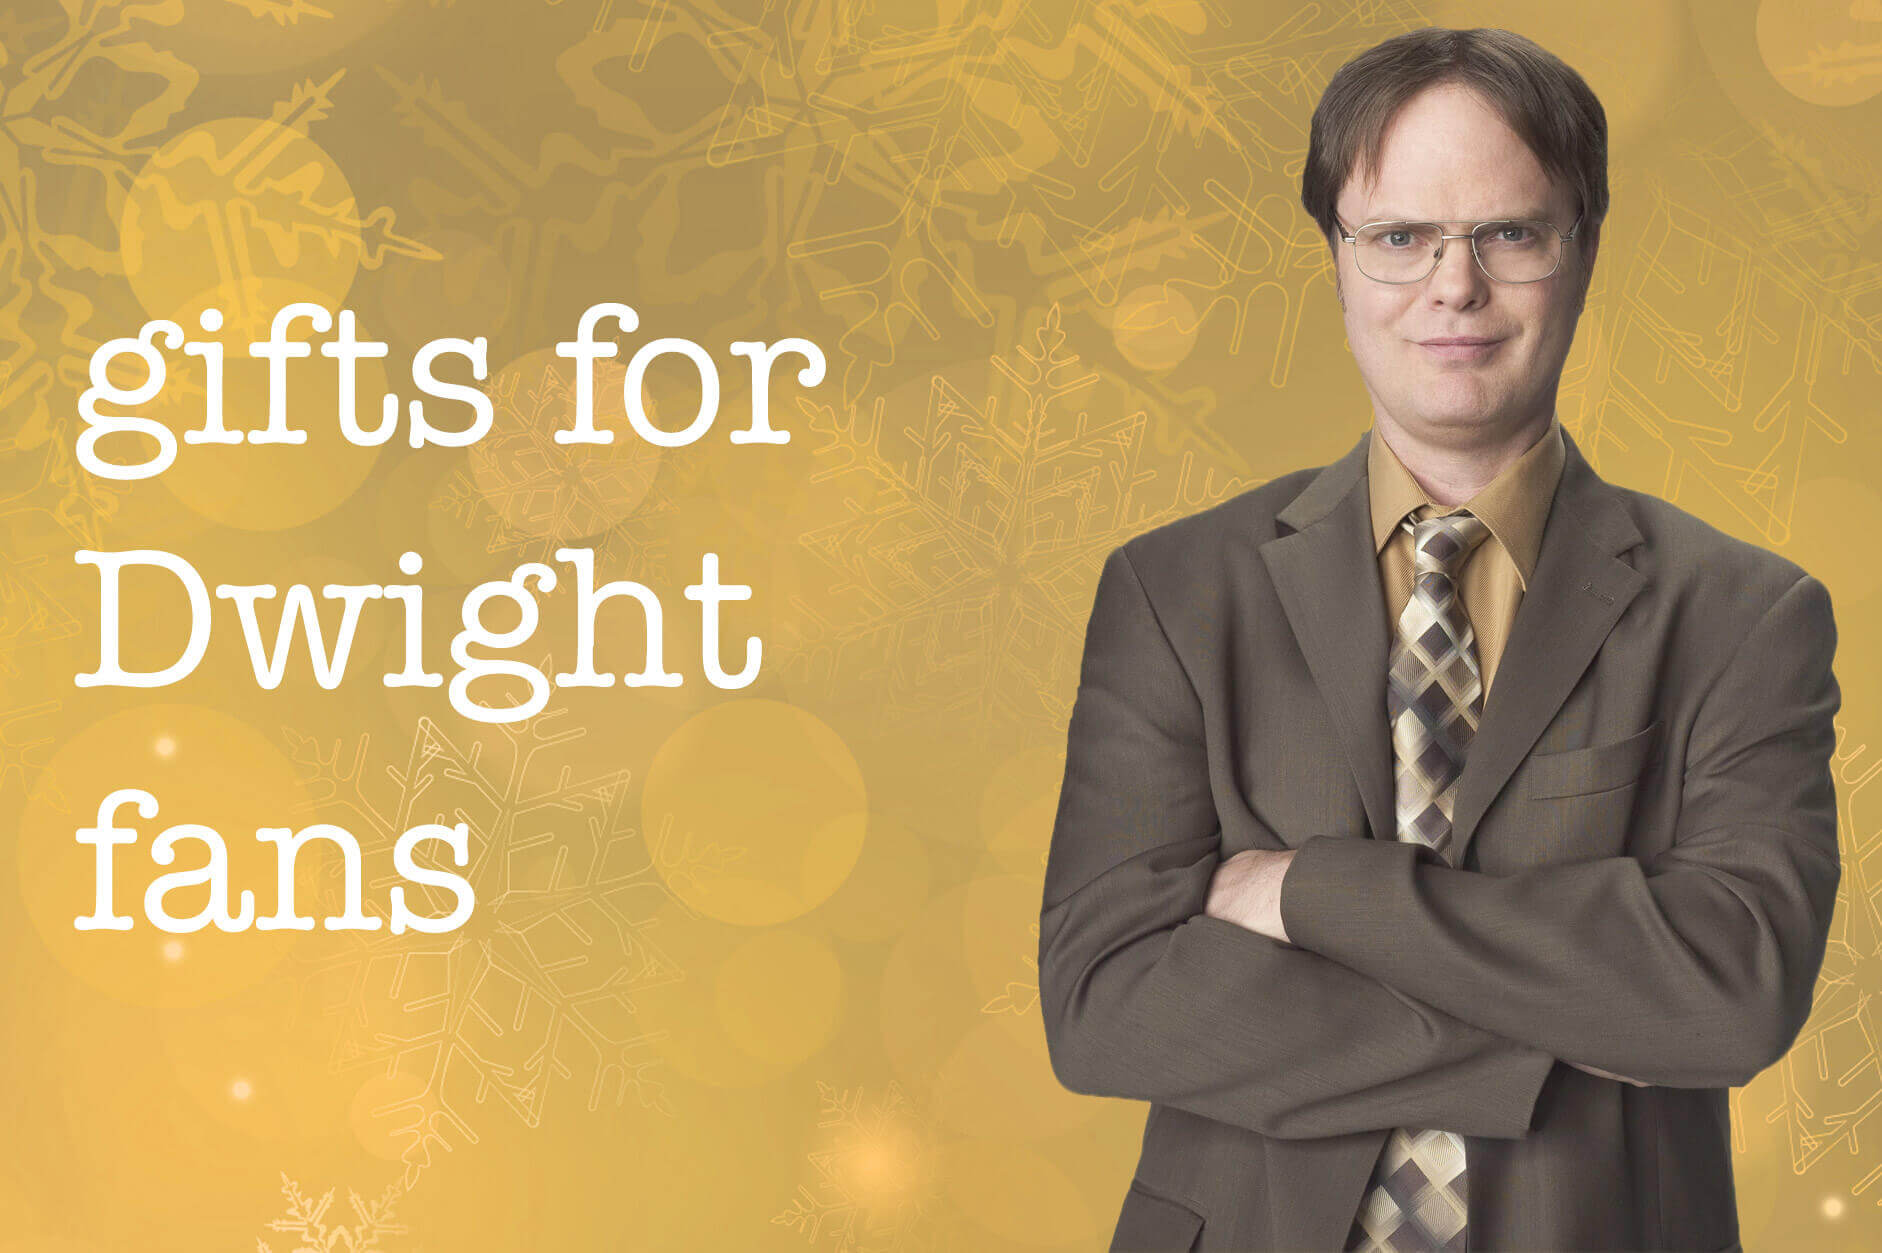 The Office Holiday Gift Guide Dwight Schrute Gifts – NBC Store